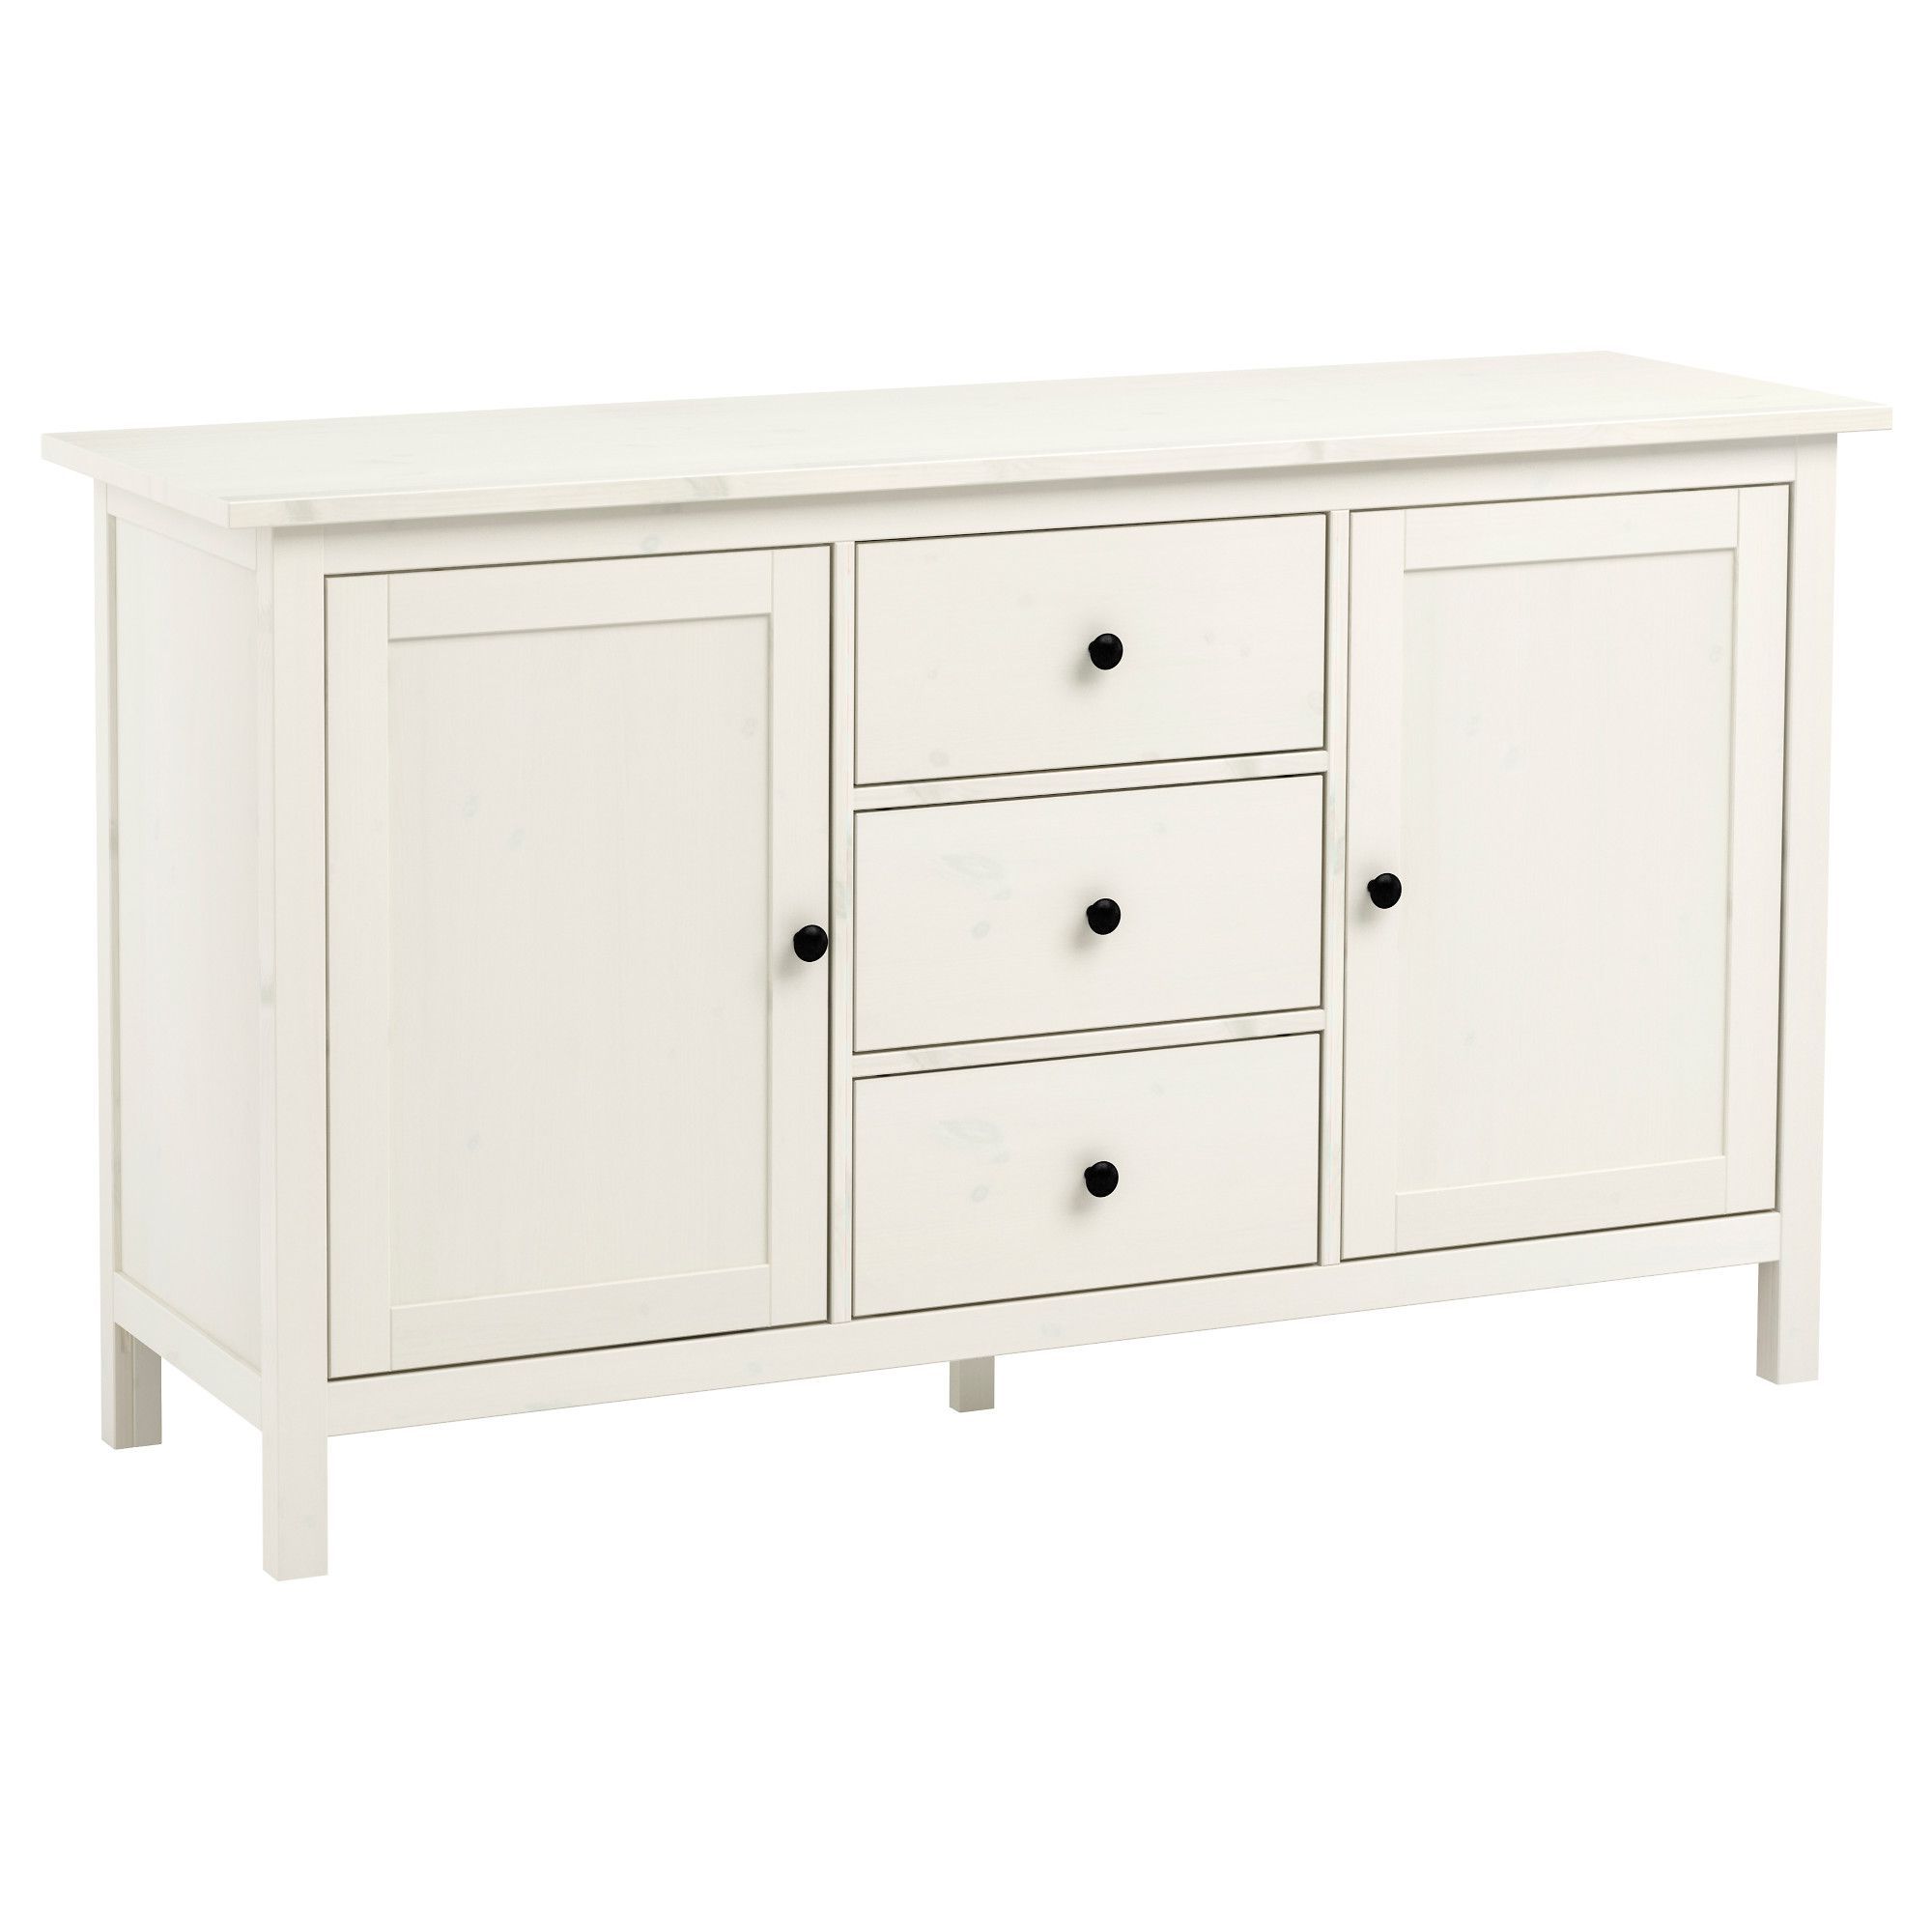 Cher Sideboards Regarding Current Ikea Hemnes White Stain Sideboard (View 3 of 20)